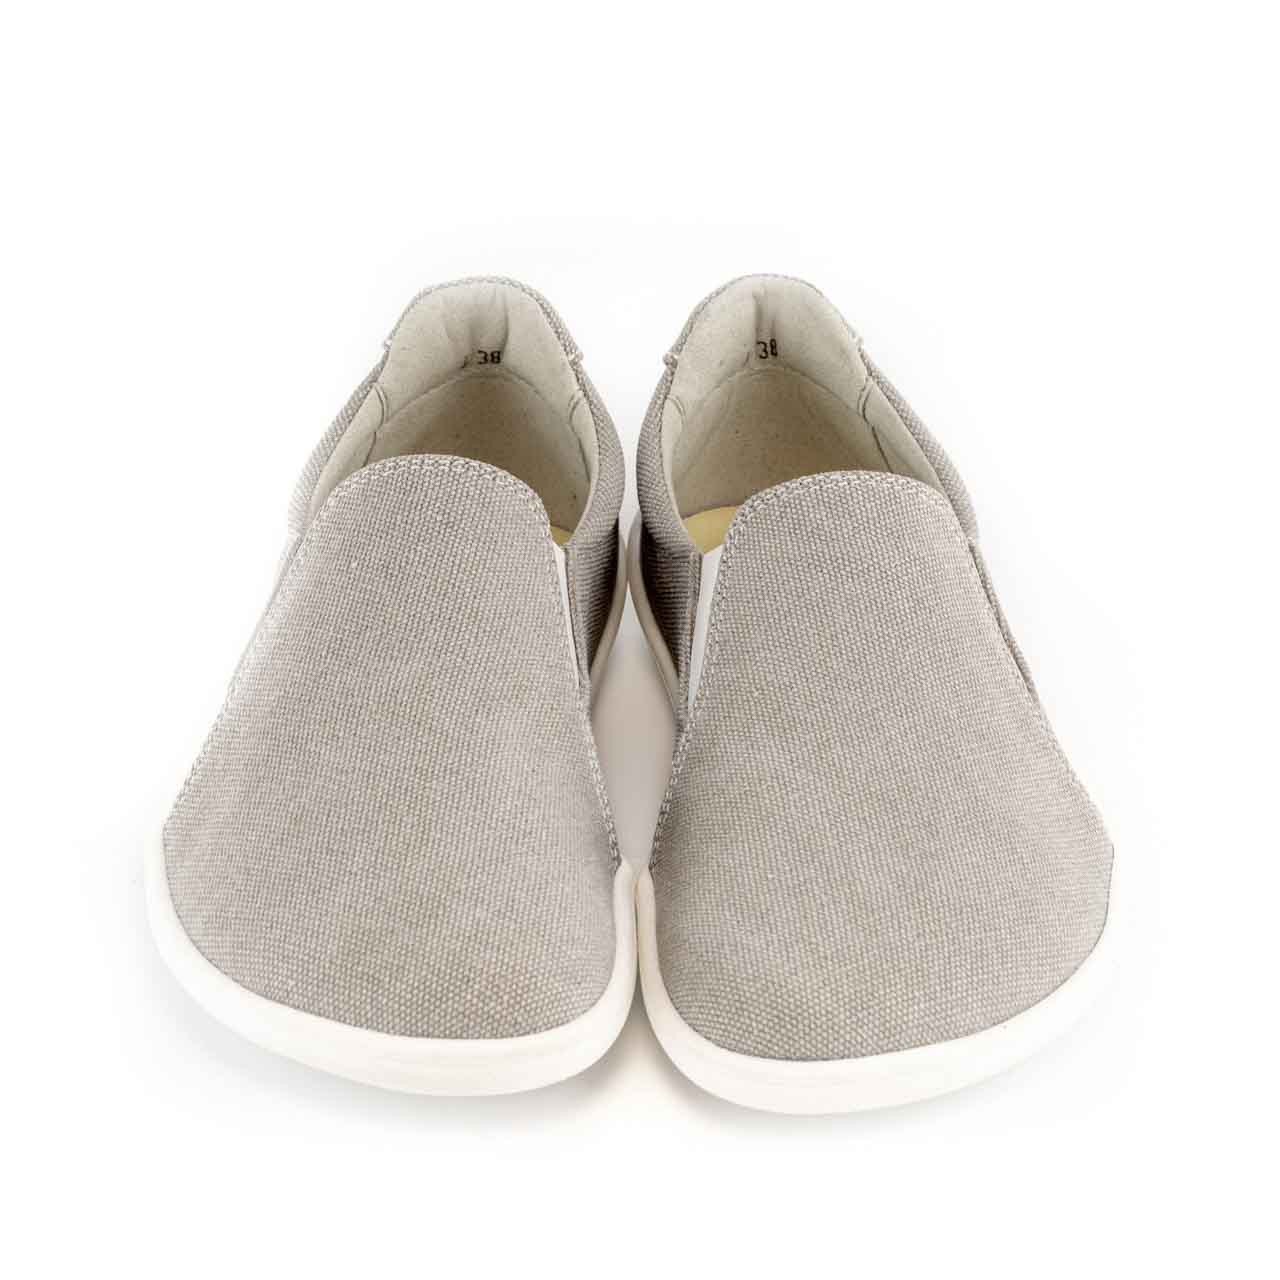 A photo of Belenka Eazy slip-on sneakers made from canvas and rubber soles. The sneakers are a sand color with white elastic on the sides and soles. Both shoes are shown from the front against a white background. #color_sand